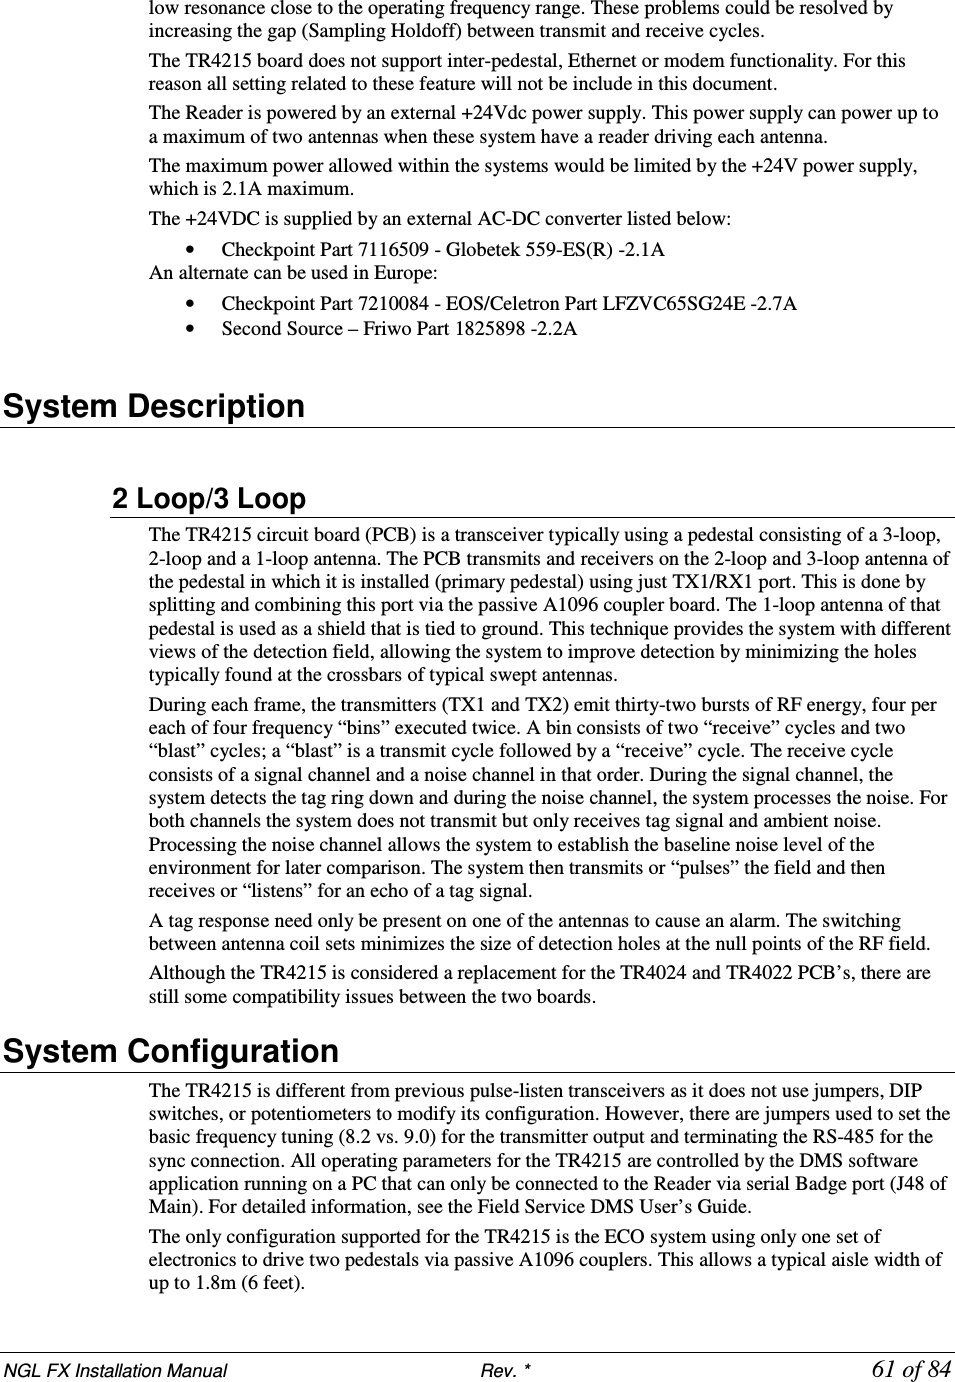 NGL FX Installation Manual                           Rev. *            61 of 84 low resonance close to the operating frequency range. These problems could be resolved by increasing the gap (Sampling Holdoff) between transmit and receive cycles. The TR4215 board does not support inter-pedestal, Ethernet or modem functionality. For this reason all setting related to these feature will not be include in this document. The Reader is powered by an external +24Vdc power supply. This power supply can power up to a maximum of two antennas when these system have a reader driving each antenna. The maximum power allowed within the systems would be limited by the +24V power supply, which is 2.1A maximum.  The +24VDC is supplied by an external AC-DC converter listed below: • Checkpoint Part 7116509 - Globetek 559-ES(R) -2.1A An alternate can be used in Europe: • Checkpoint Part 7210084 - EOS/Celetron Part LFZVC65SG24E -2.7A  • Second Source – Friwo Part 1825898 -2.2A  System Description  2 Loop/3 Loop The TR4215 circuit board (PCB) is a transceiver typically using a pedestal consisting of a 3-loop, 2-loop and a 1-loop antenna. The PCB transmits and receivers on the 2-loop and 3-loop antenna of the pedestal in which it is installed (primary pedestal) using just TX1/RX1 port. This is done by splitting and combining this port via the passive A1096 coupler board. The 1-loop antenna of that pedestal is used as a shield that is tied to ground. This technique provides the system with different views of the detection field, allowing the system to improve detection by minimizing the holes typically found at the crossbars of typical swept antennas. During each frame, the transmitters (TX1 and TX2) emit thirty-two bursts of RF energy, four per each of four frequency “bins” executed twice. A bin consists of two “receive” cycles and two “blast” cycles; a “blast” is a transmit cycle followed by a “receive” cycle. The receive cycle consists of a signal channel and a noise channel in that order. During the signal channel, the system detects the tag ring down and during the noise channel, the system processes the noise. For both channels the system does not transmit but only receives tag signal and ambient noise. Processing the noise channel allows the system to establish the baseline noise level of the environment for later comparison. The system then transmits or “pulses” the field and then receives or “listens” for an echo of a tag signal.  A tag response need only be present on one of the antennas to cause an alarm. The switching between antenna coil sets minimizes the size of detection holes at the null points of the RF field. Although the TR4215 is considered a replacement for the TR4024 and TR4022 PCB’s, there are still some compatibility issues between the two boards. System Configuration The TR4215 is different from previous pulse-listen transceivers as it does not use jumpers, DIP switches, or potentiometers to modify its configuration. However, there are jumpers used to set the basic frequency tuning (8.2 vs. 9.0) for the transmitter output and terminating the RS-485 for the sync connection. All operating parameters for the TR4215 are controlled by the DMS software application running on a PC that can only be connected to the Reader via serial Badge port (J48 of Main). For detailed information, see the Field Service DMS User’s Guide. The only configuration supported for the TR4215 is the ECO system using only one set of electronics to drive two pedestals via passive A1096 couplers. This allows a typical aisle width of up to 1.8m (6 feet). 